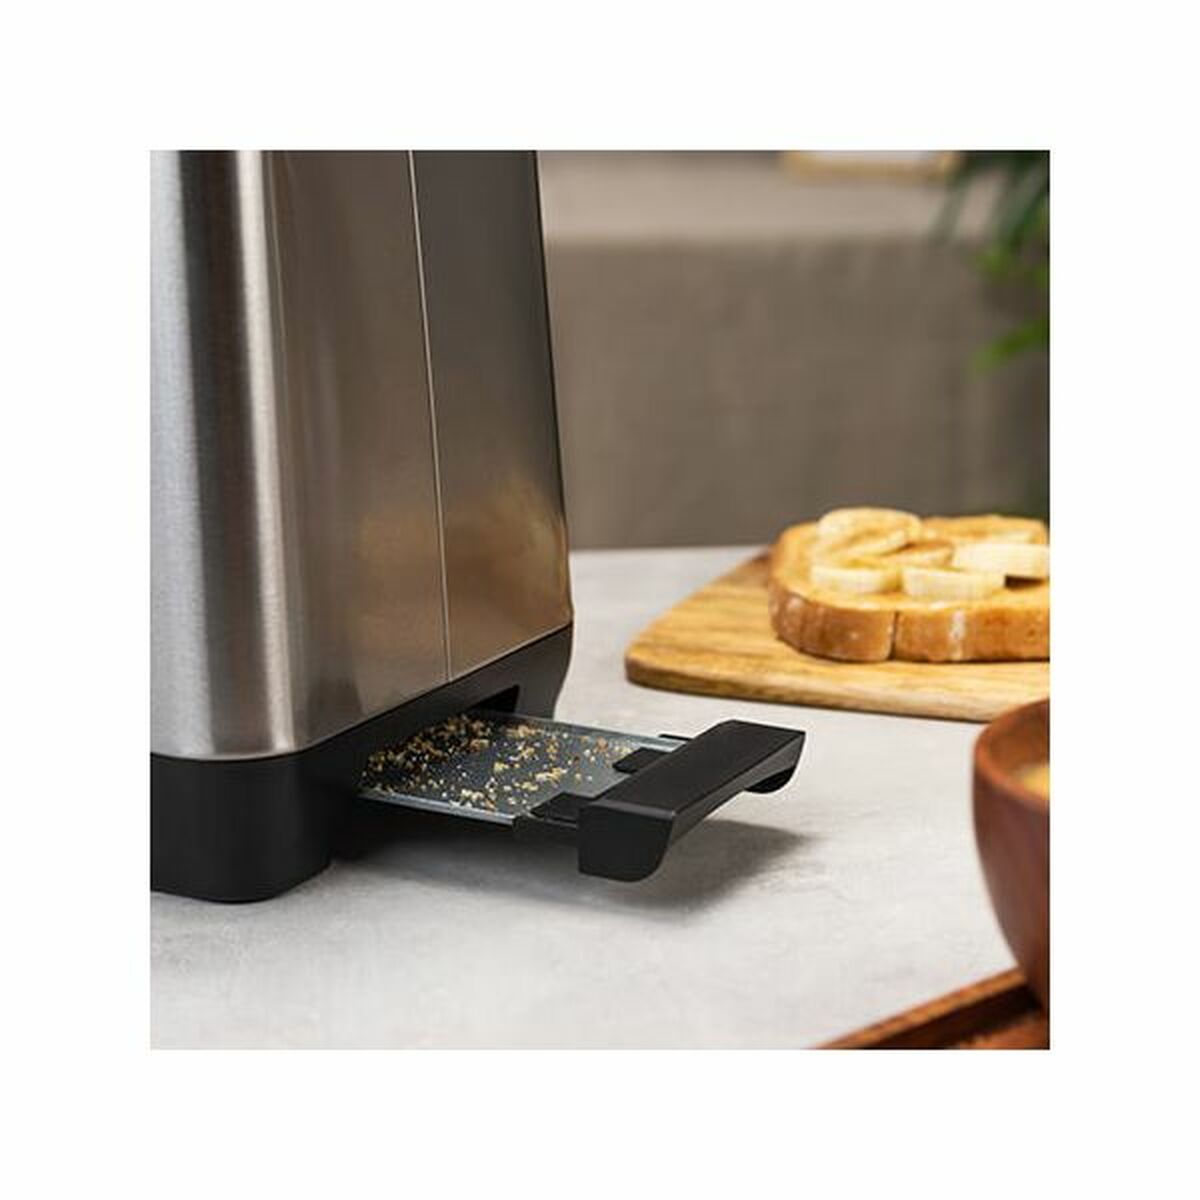 Toaster Cecotec BigToast Double Stainless steel 1000 W